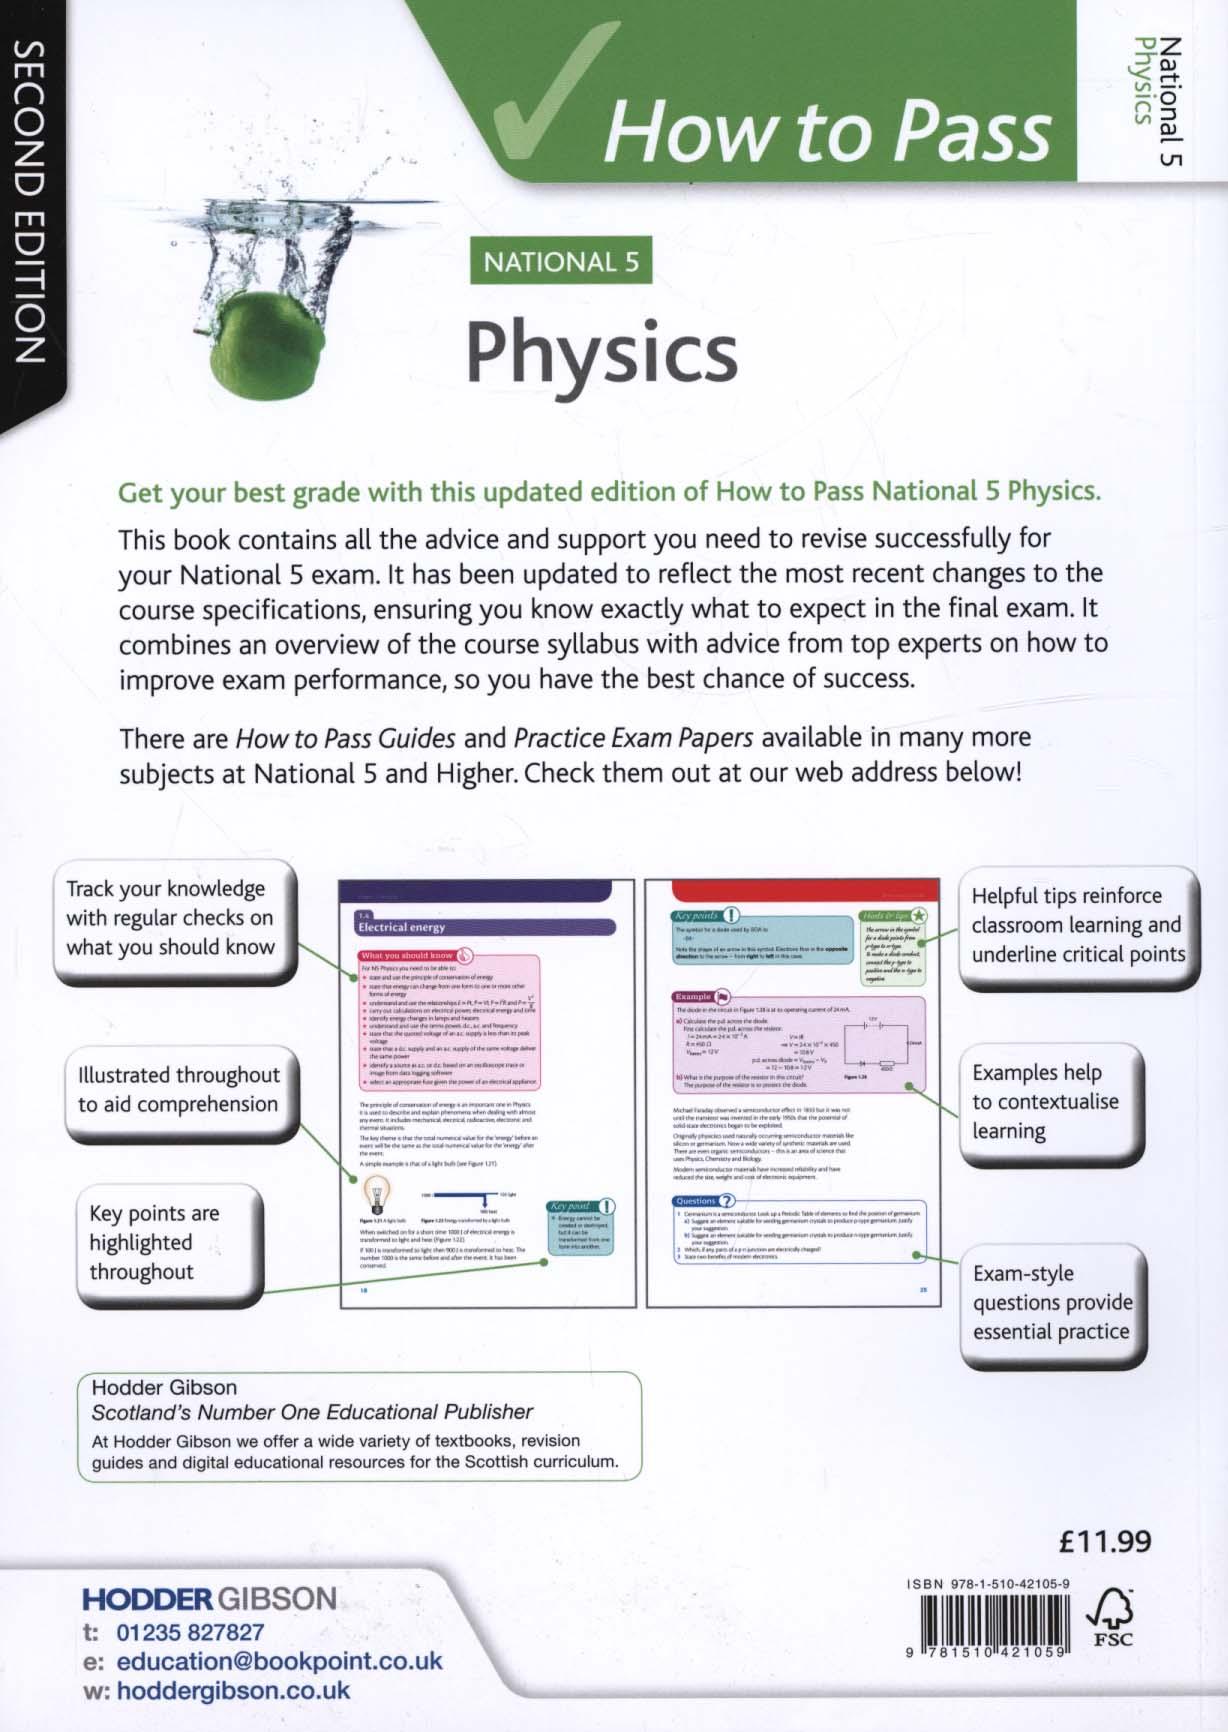 How to Pass National 5 Physics: Second Edition